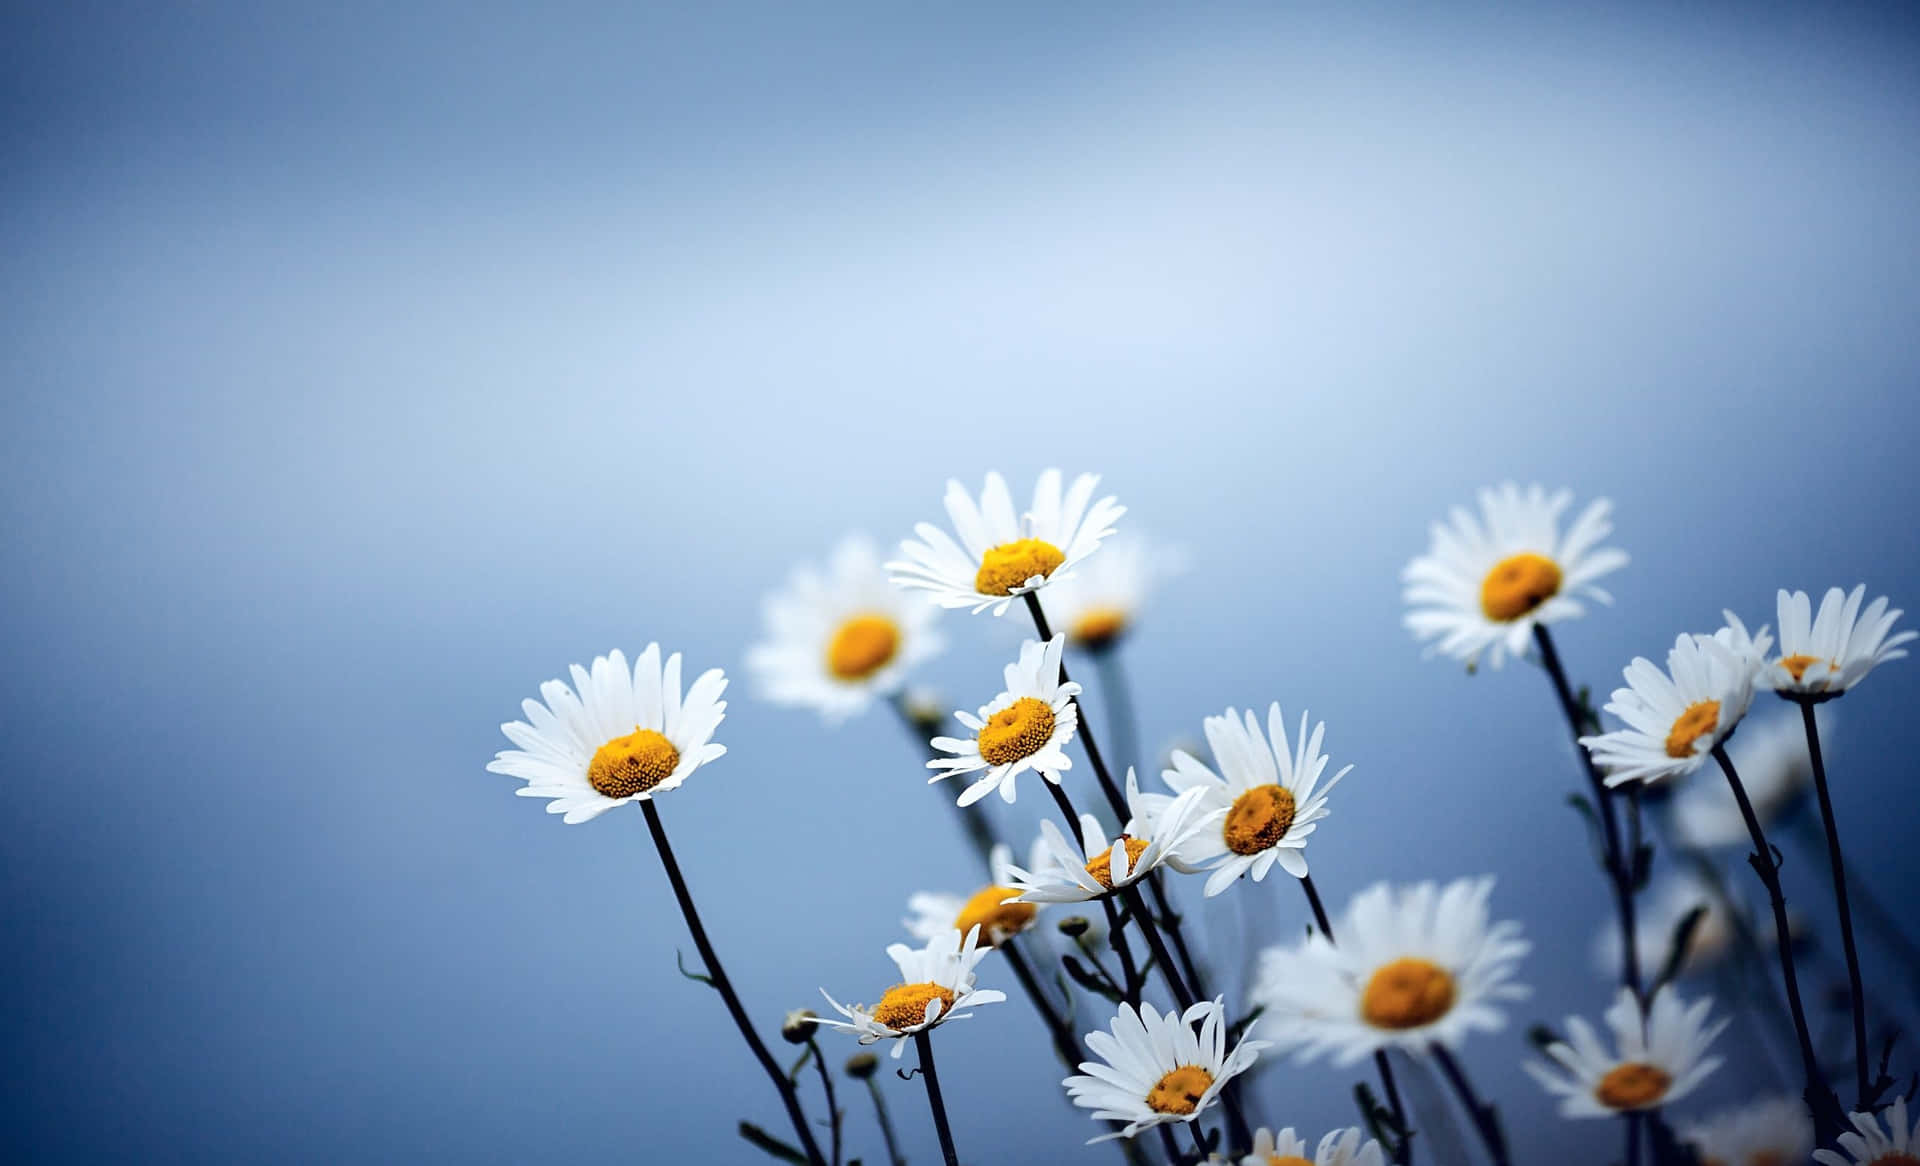 "A field of daisies in full bloom, an image of beauty and joy."